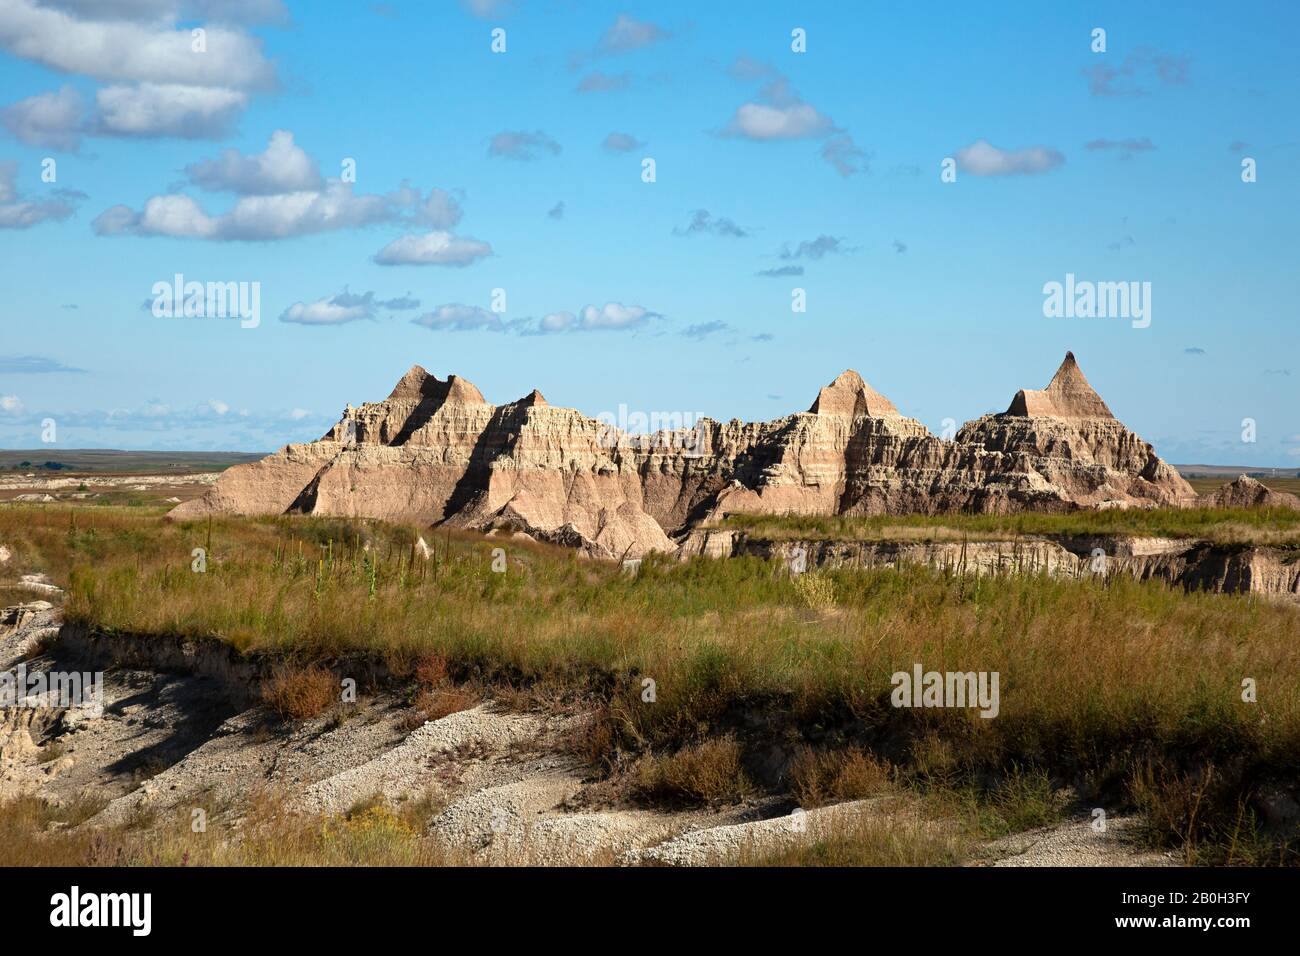 SD00142-00...SOUTH DAKOTA - The Great Plains and eroded buttes viewedf from the Castle Trail in Badlands National Park. Stock Photo